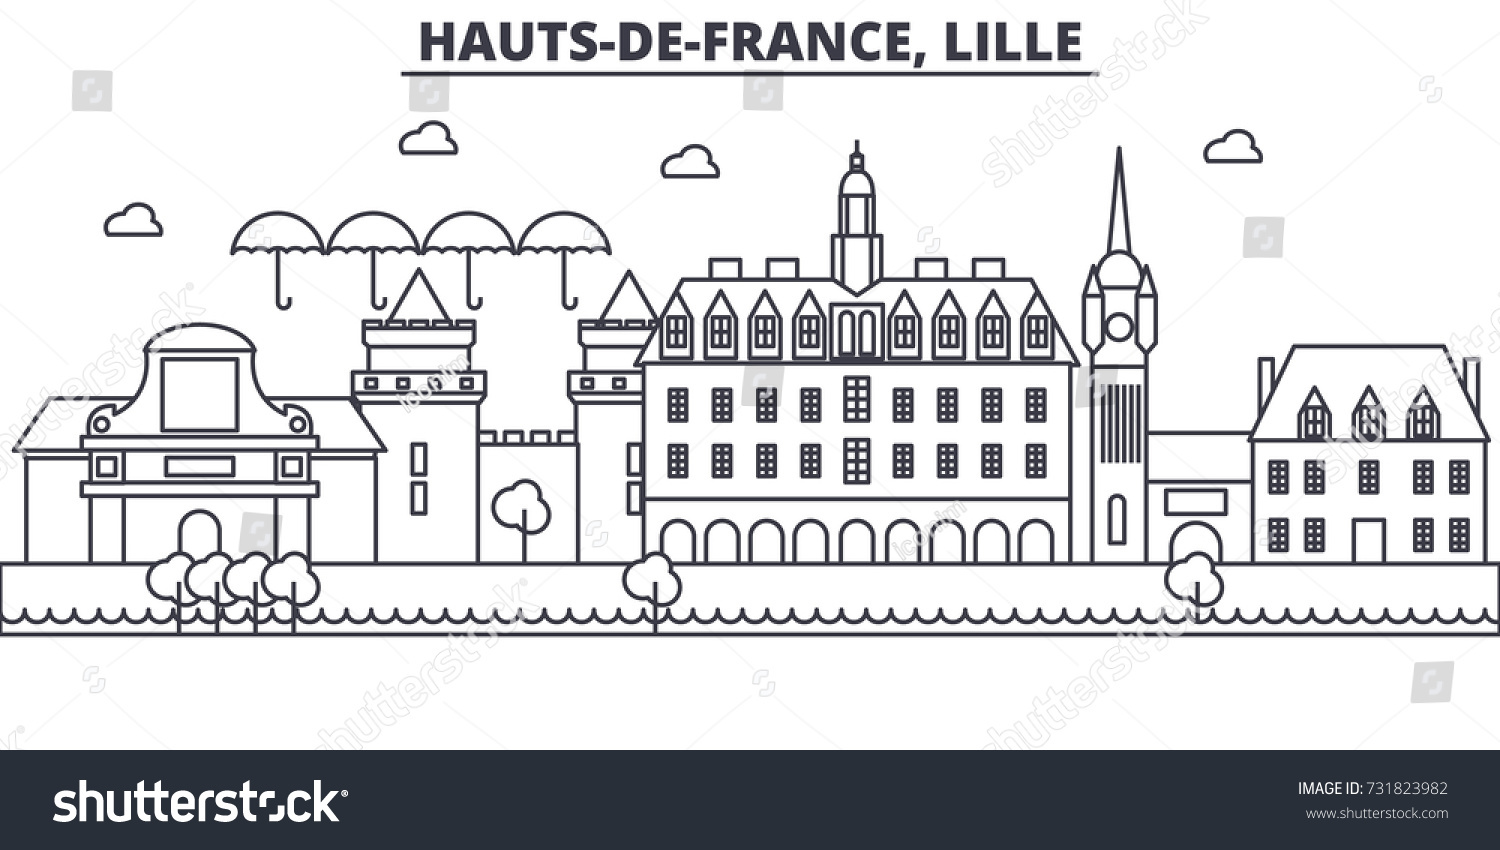 SVG of France, Lille architecture line skyline illustration. Linear vector cityscape with famous landmarks, city sights, design icons. Landscape wtih editable strokes svg